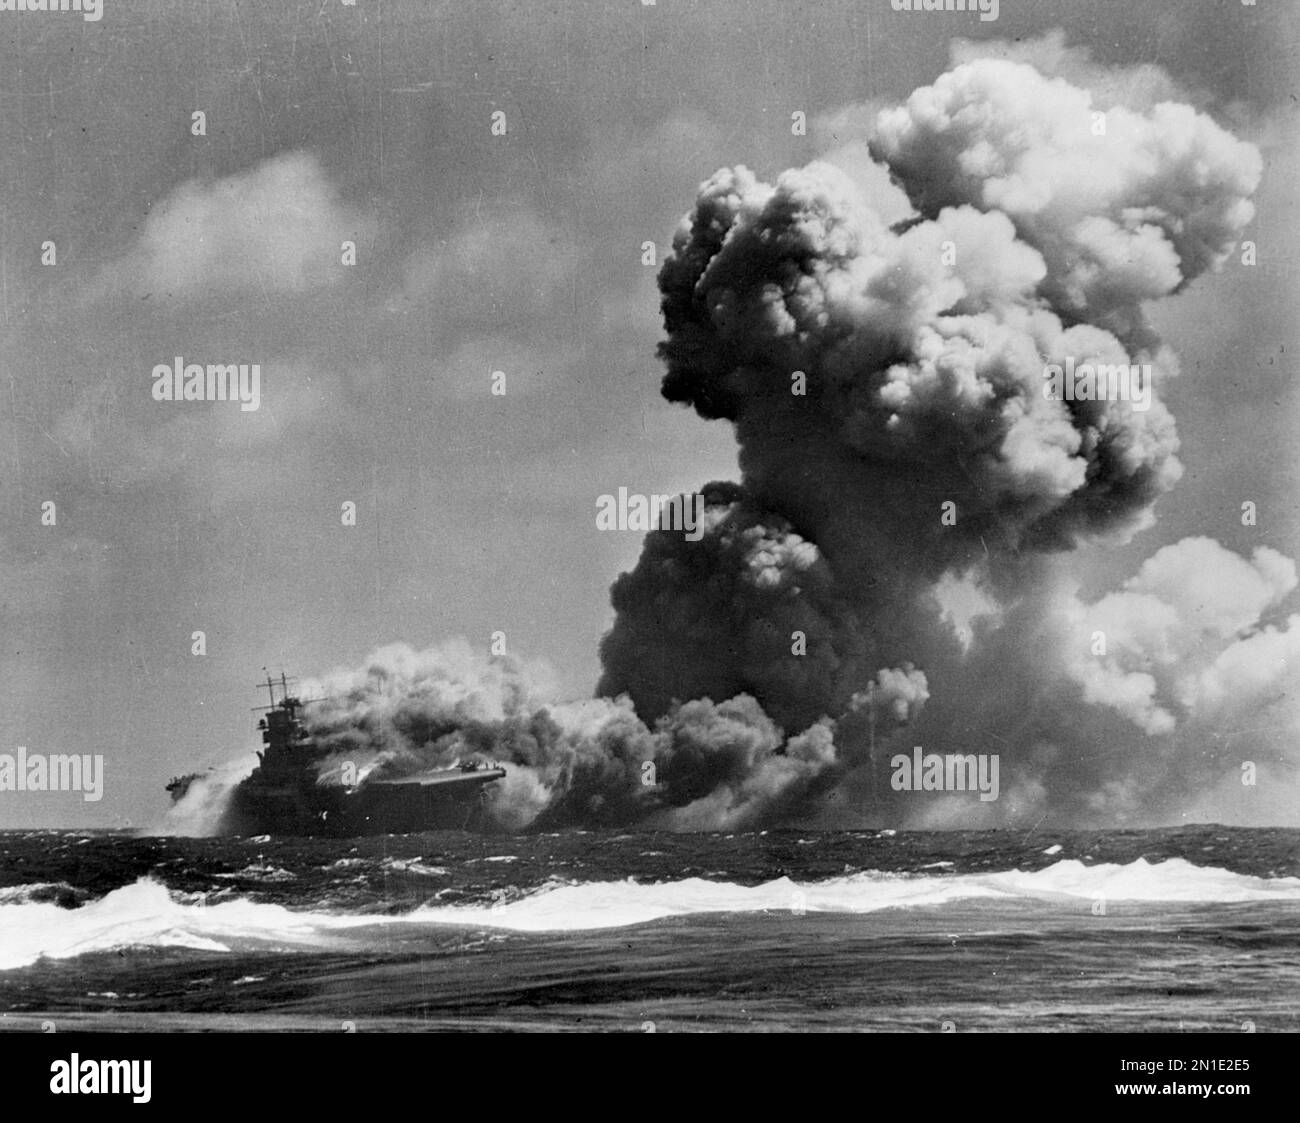 GUADALCANAL, SOLOMON ISLANDS - 15 September 1942 - The USS Wasp ( CV-7 ) burning and listing after she was torpedoed by the Japanese submarine I-19, o Stock Photo